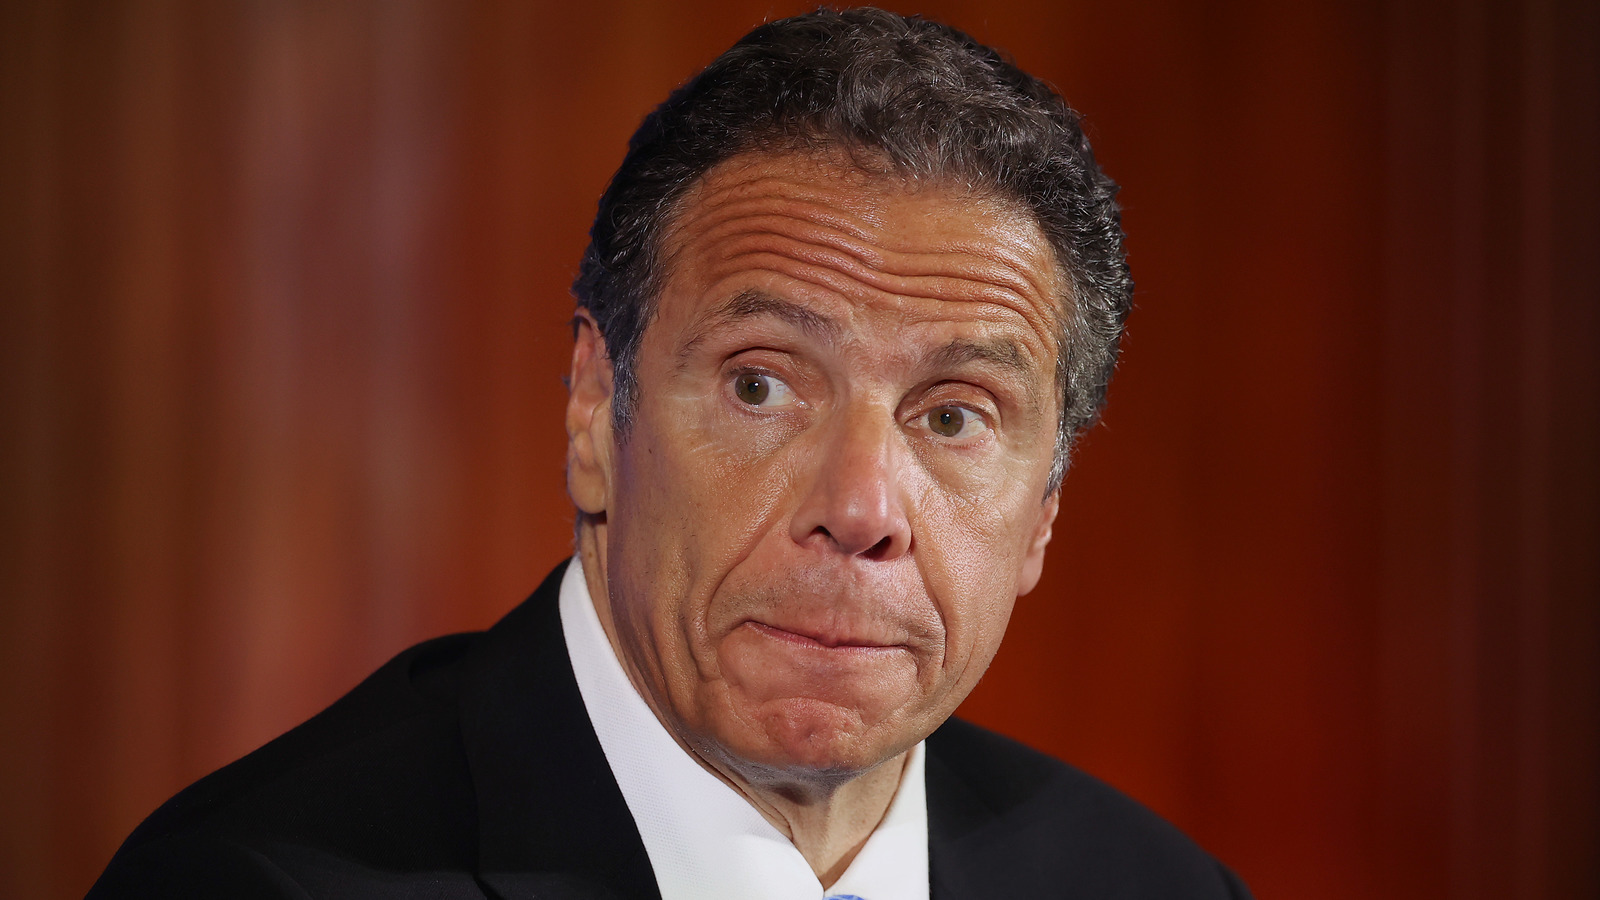 Cuomo Breaks His Silence On Disturbing Harassment Allegations